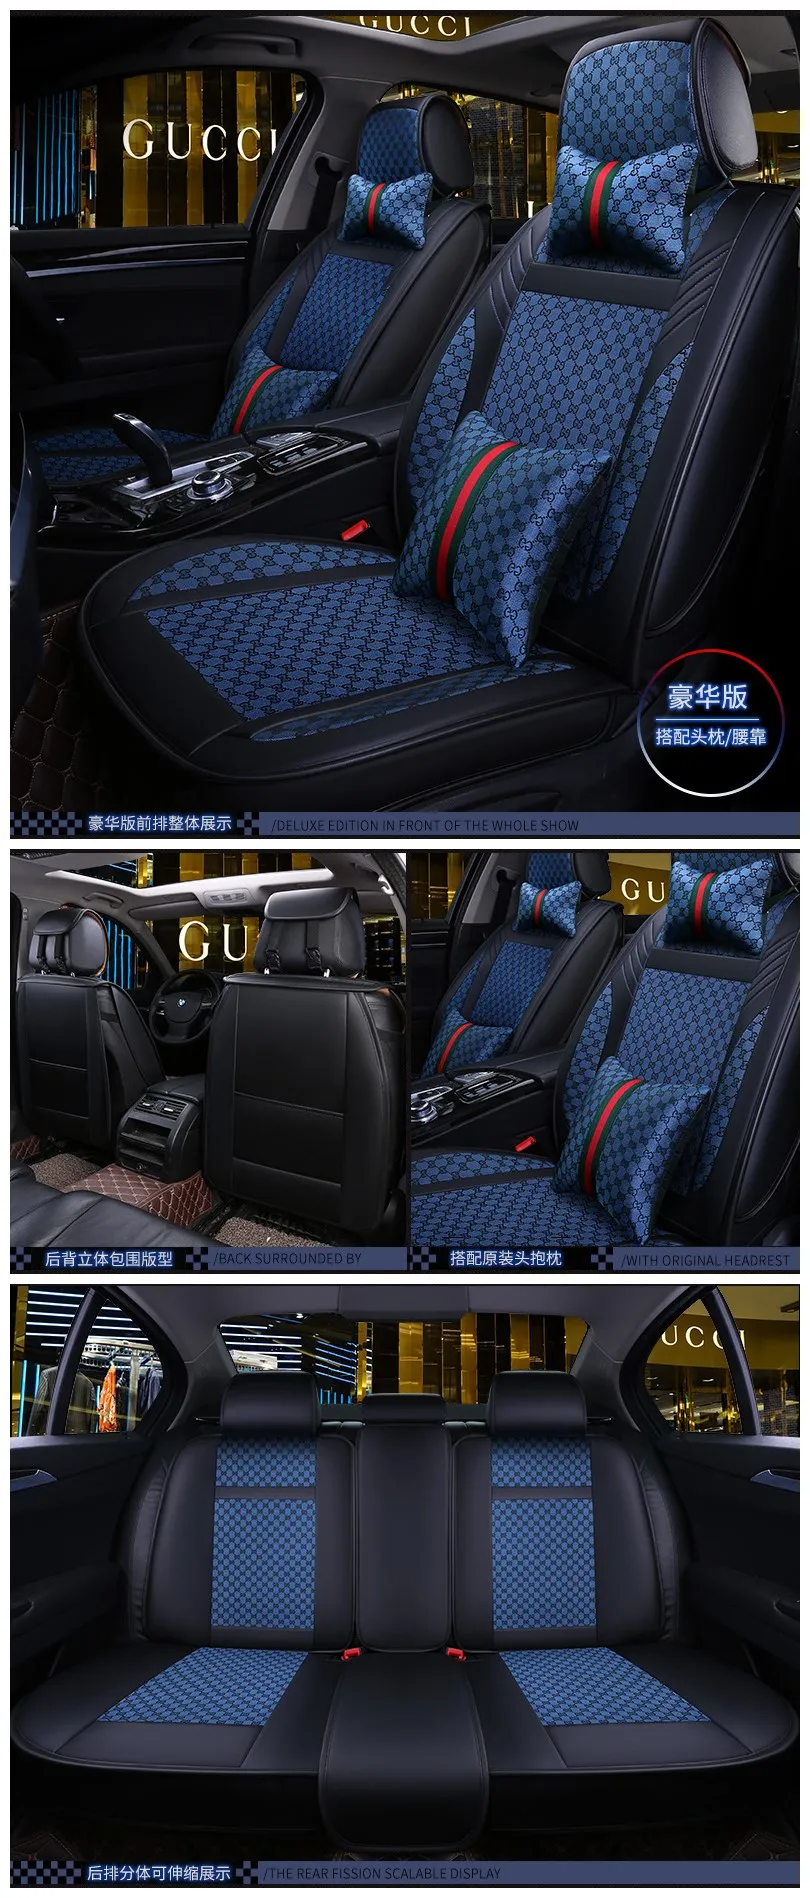 Gucci Inspired Car Seat Covers Or Pillow Sets Things Expressed - Louis  Vuitton Seat Covers